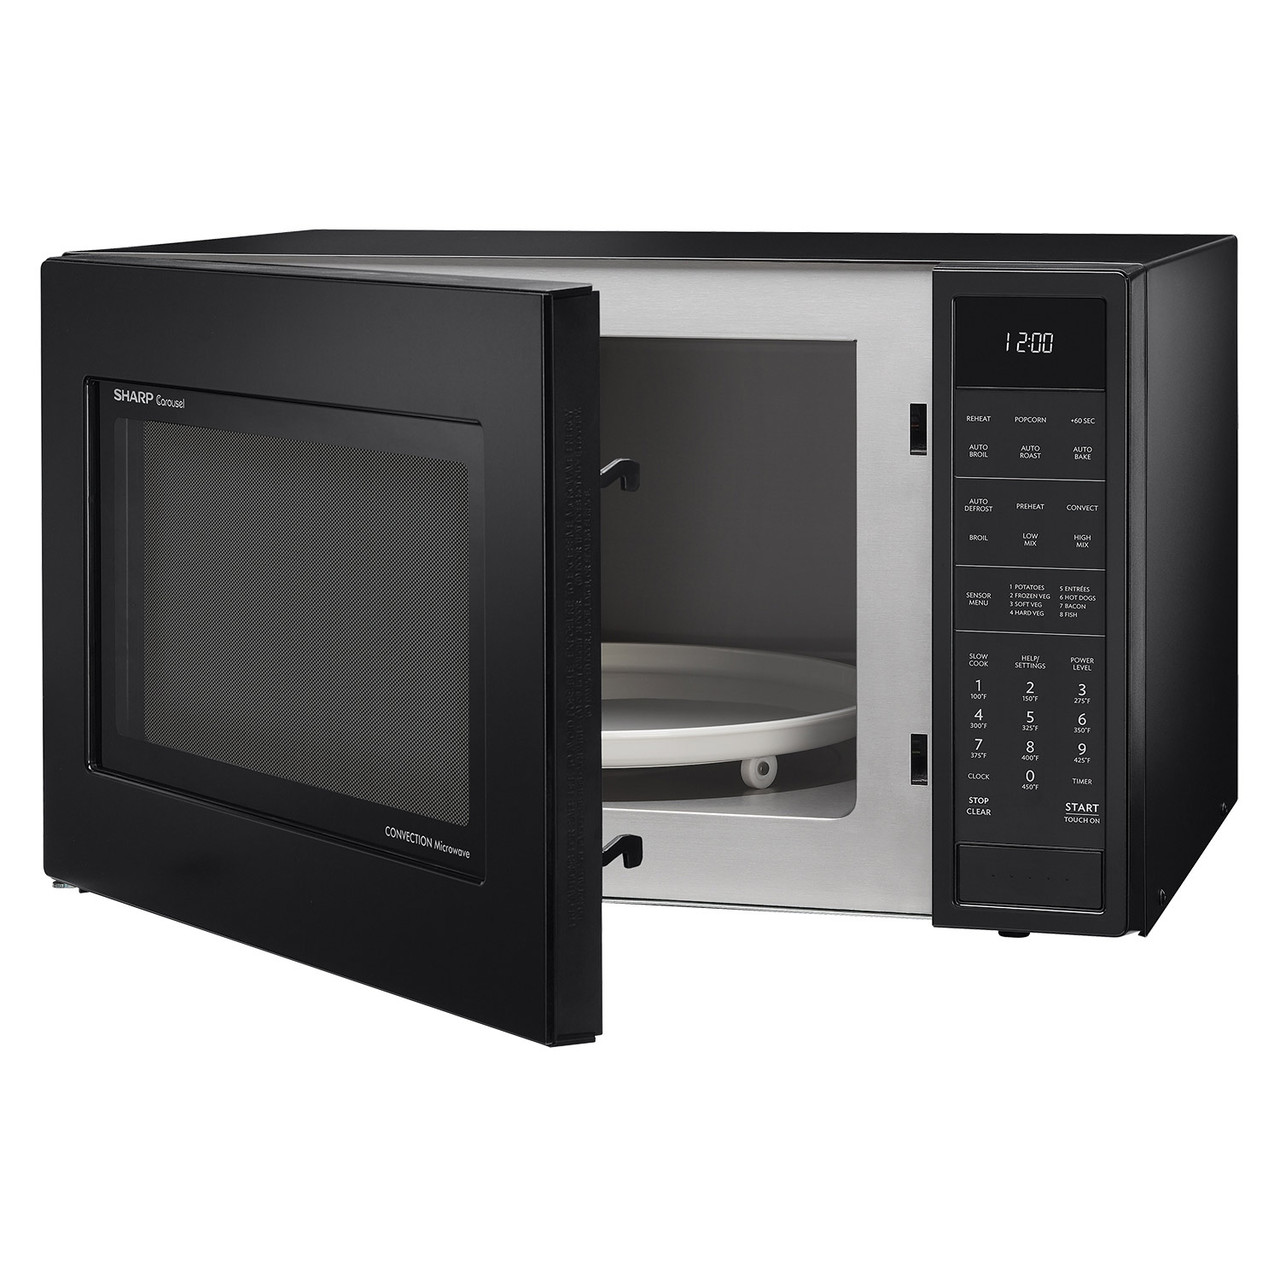 1.5 cu. ft. Sharp Black Carousel Convection Microwave (SMC1585BB) – left angle view with door open